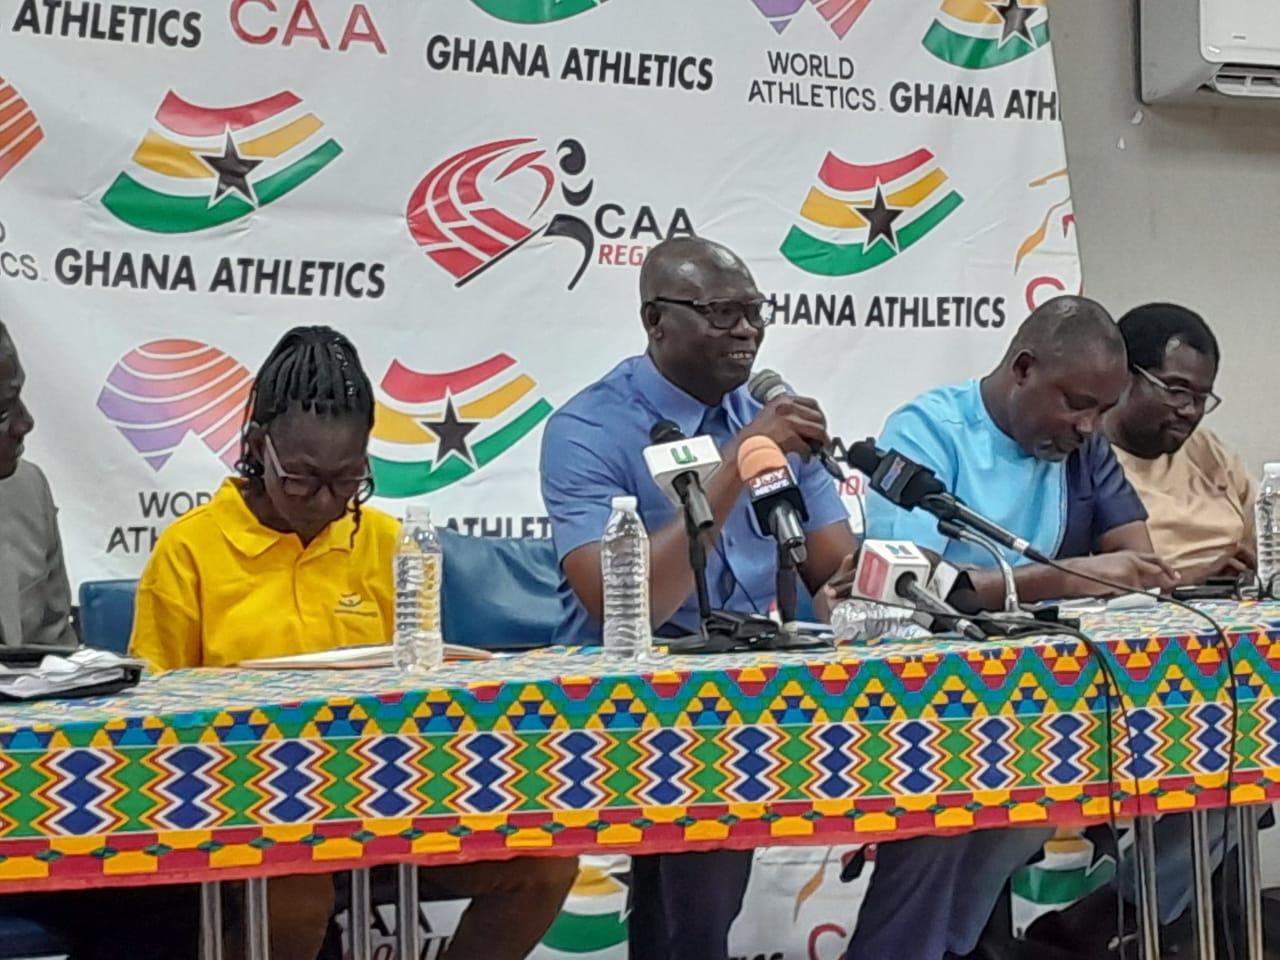 Its only investment that’ll make Ghanaian athletes competitive – Osei Asibey